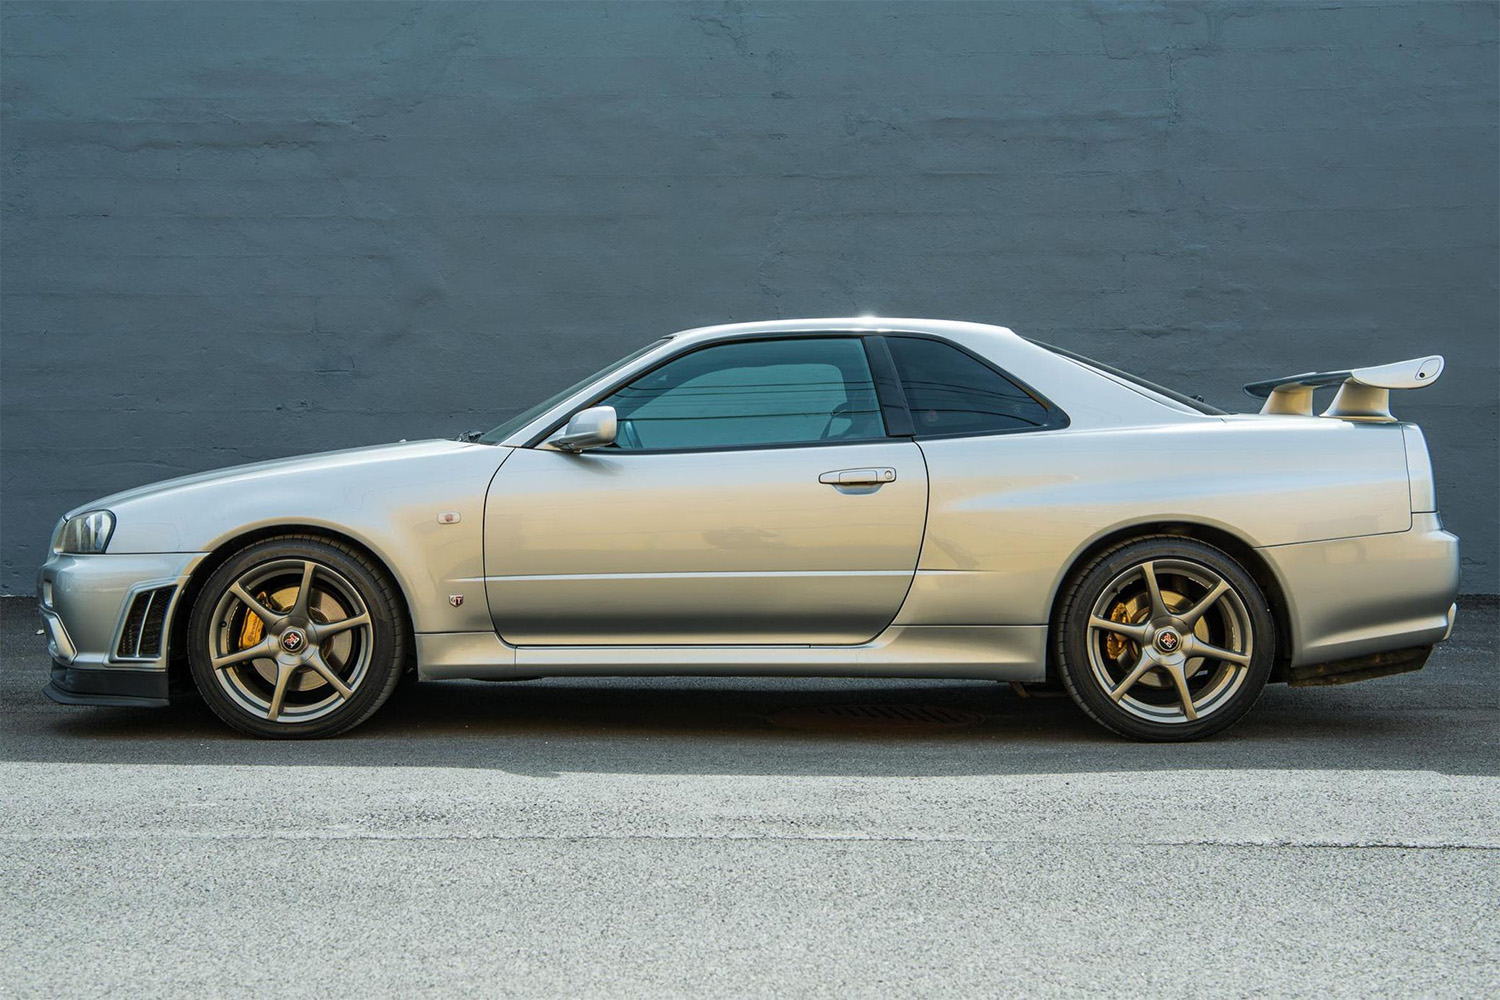 Side profile of Left Hand Drive Converted Nissan Skyline R34 GT-R